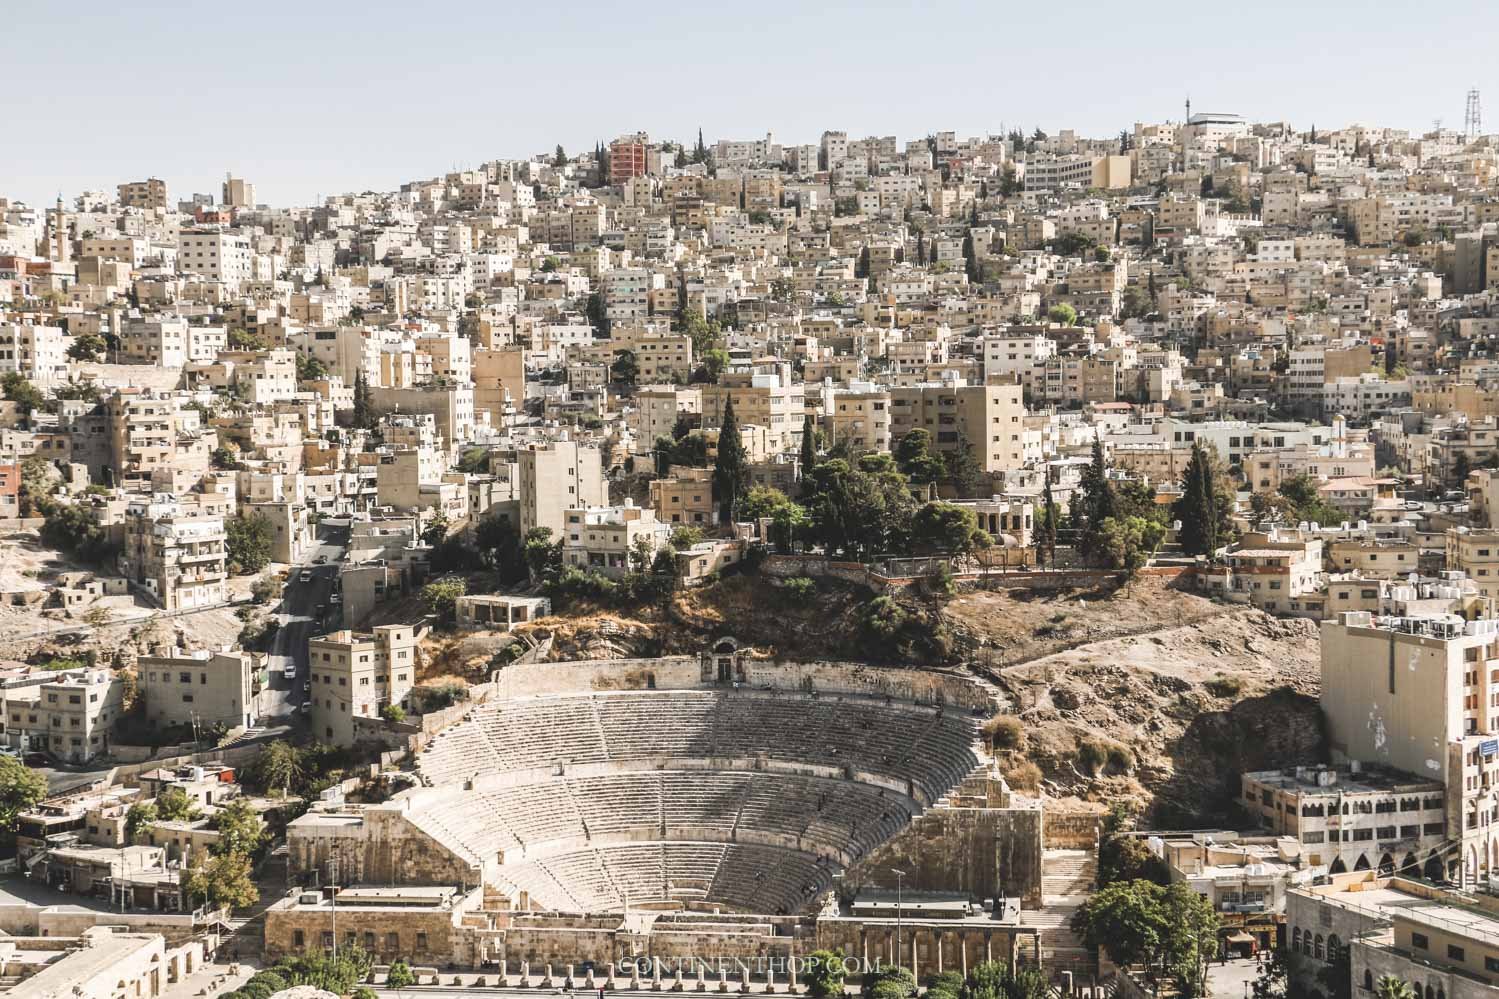 Amphitheatre in an Amman itinerary - things to do in amman